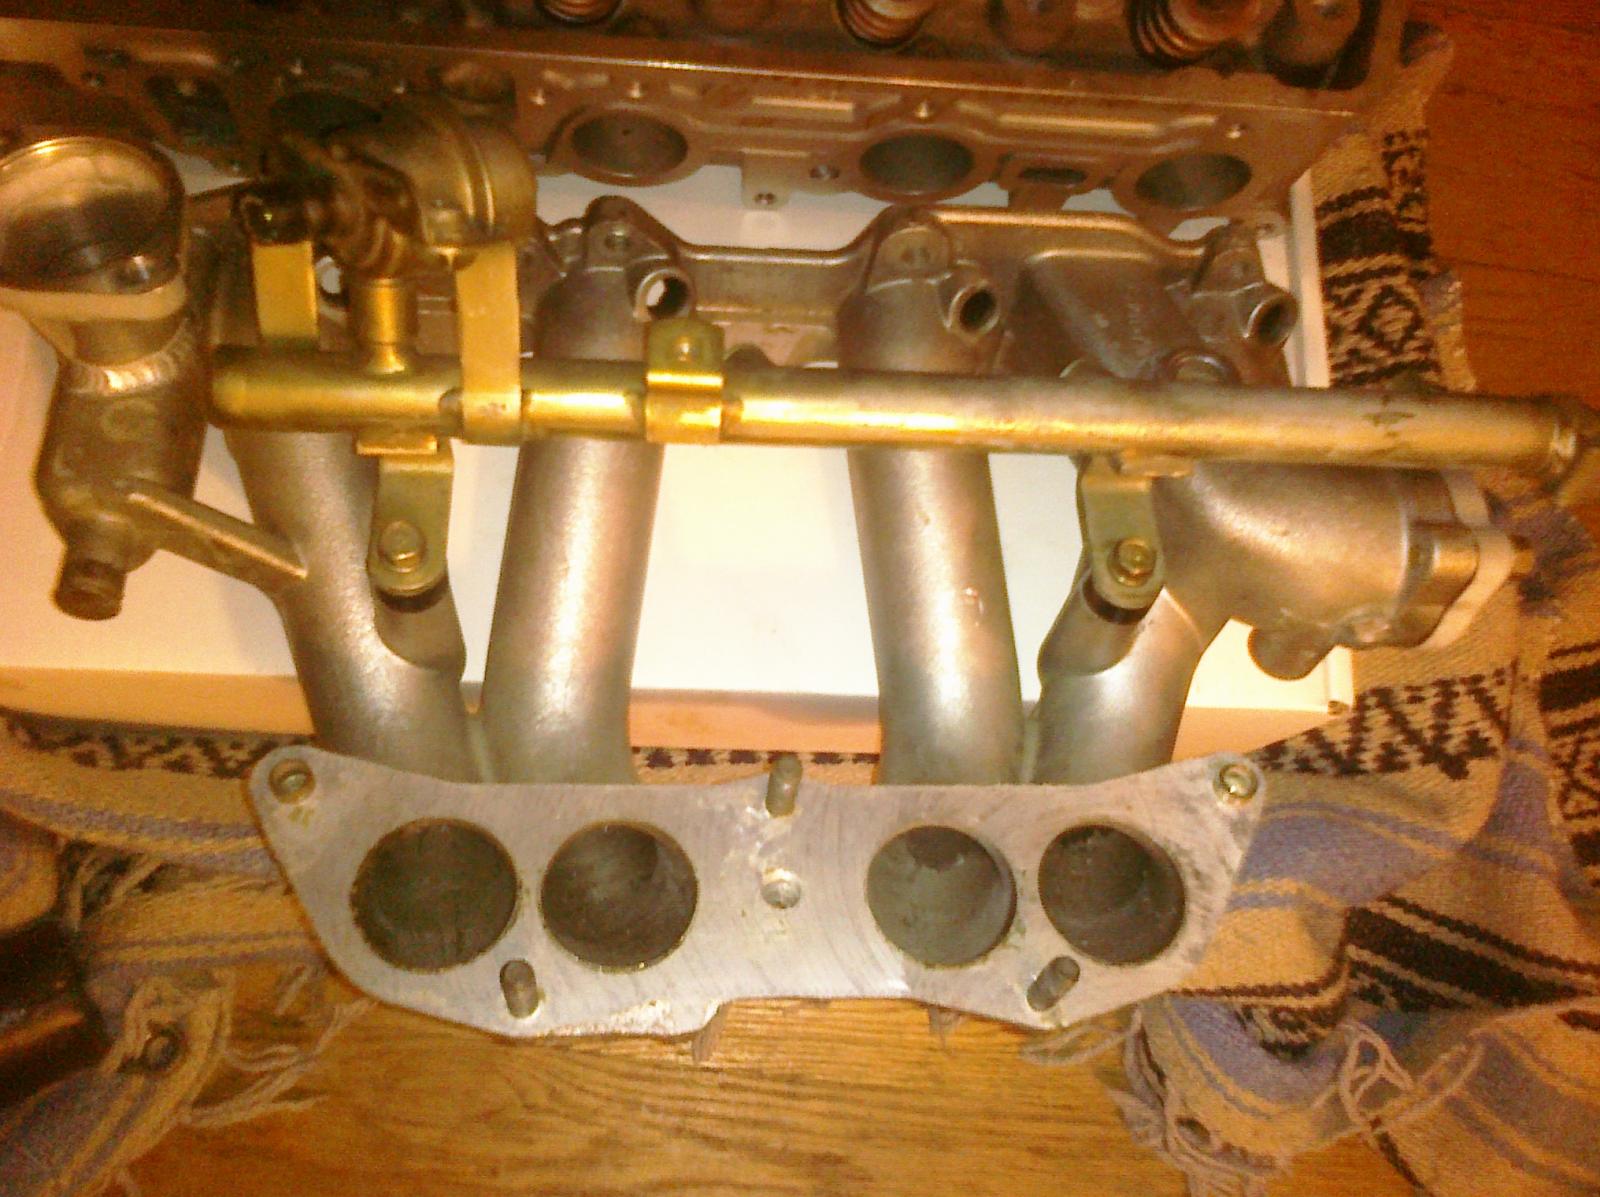 More lower intake pictures